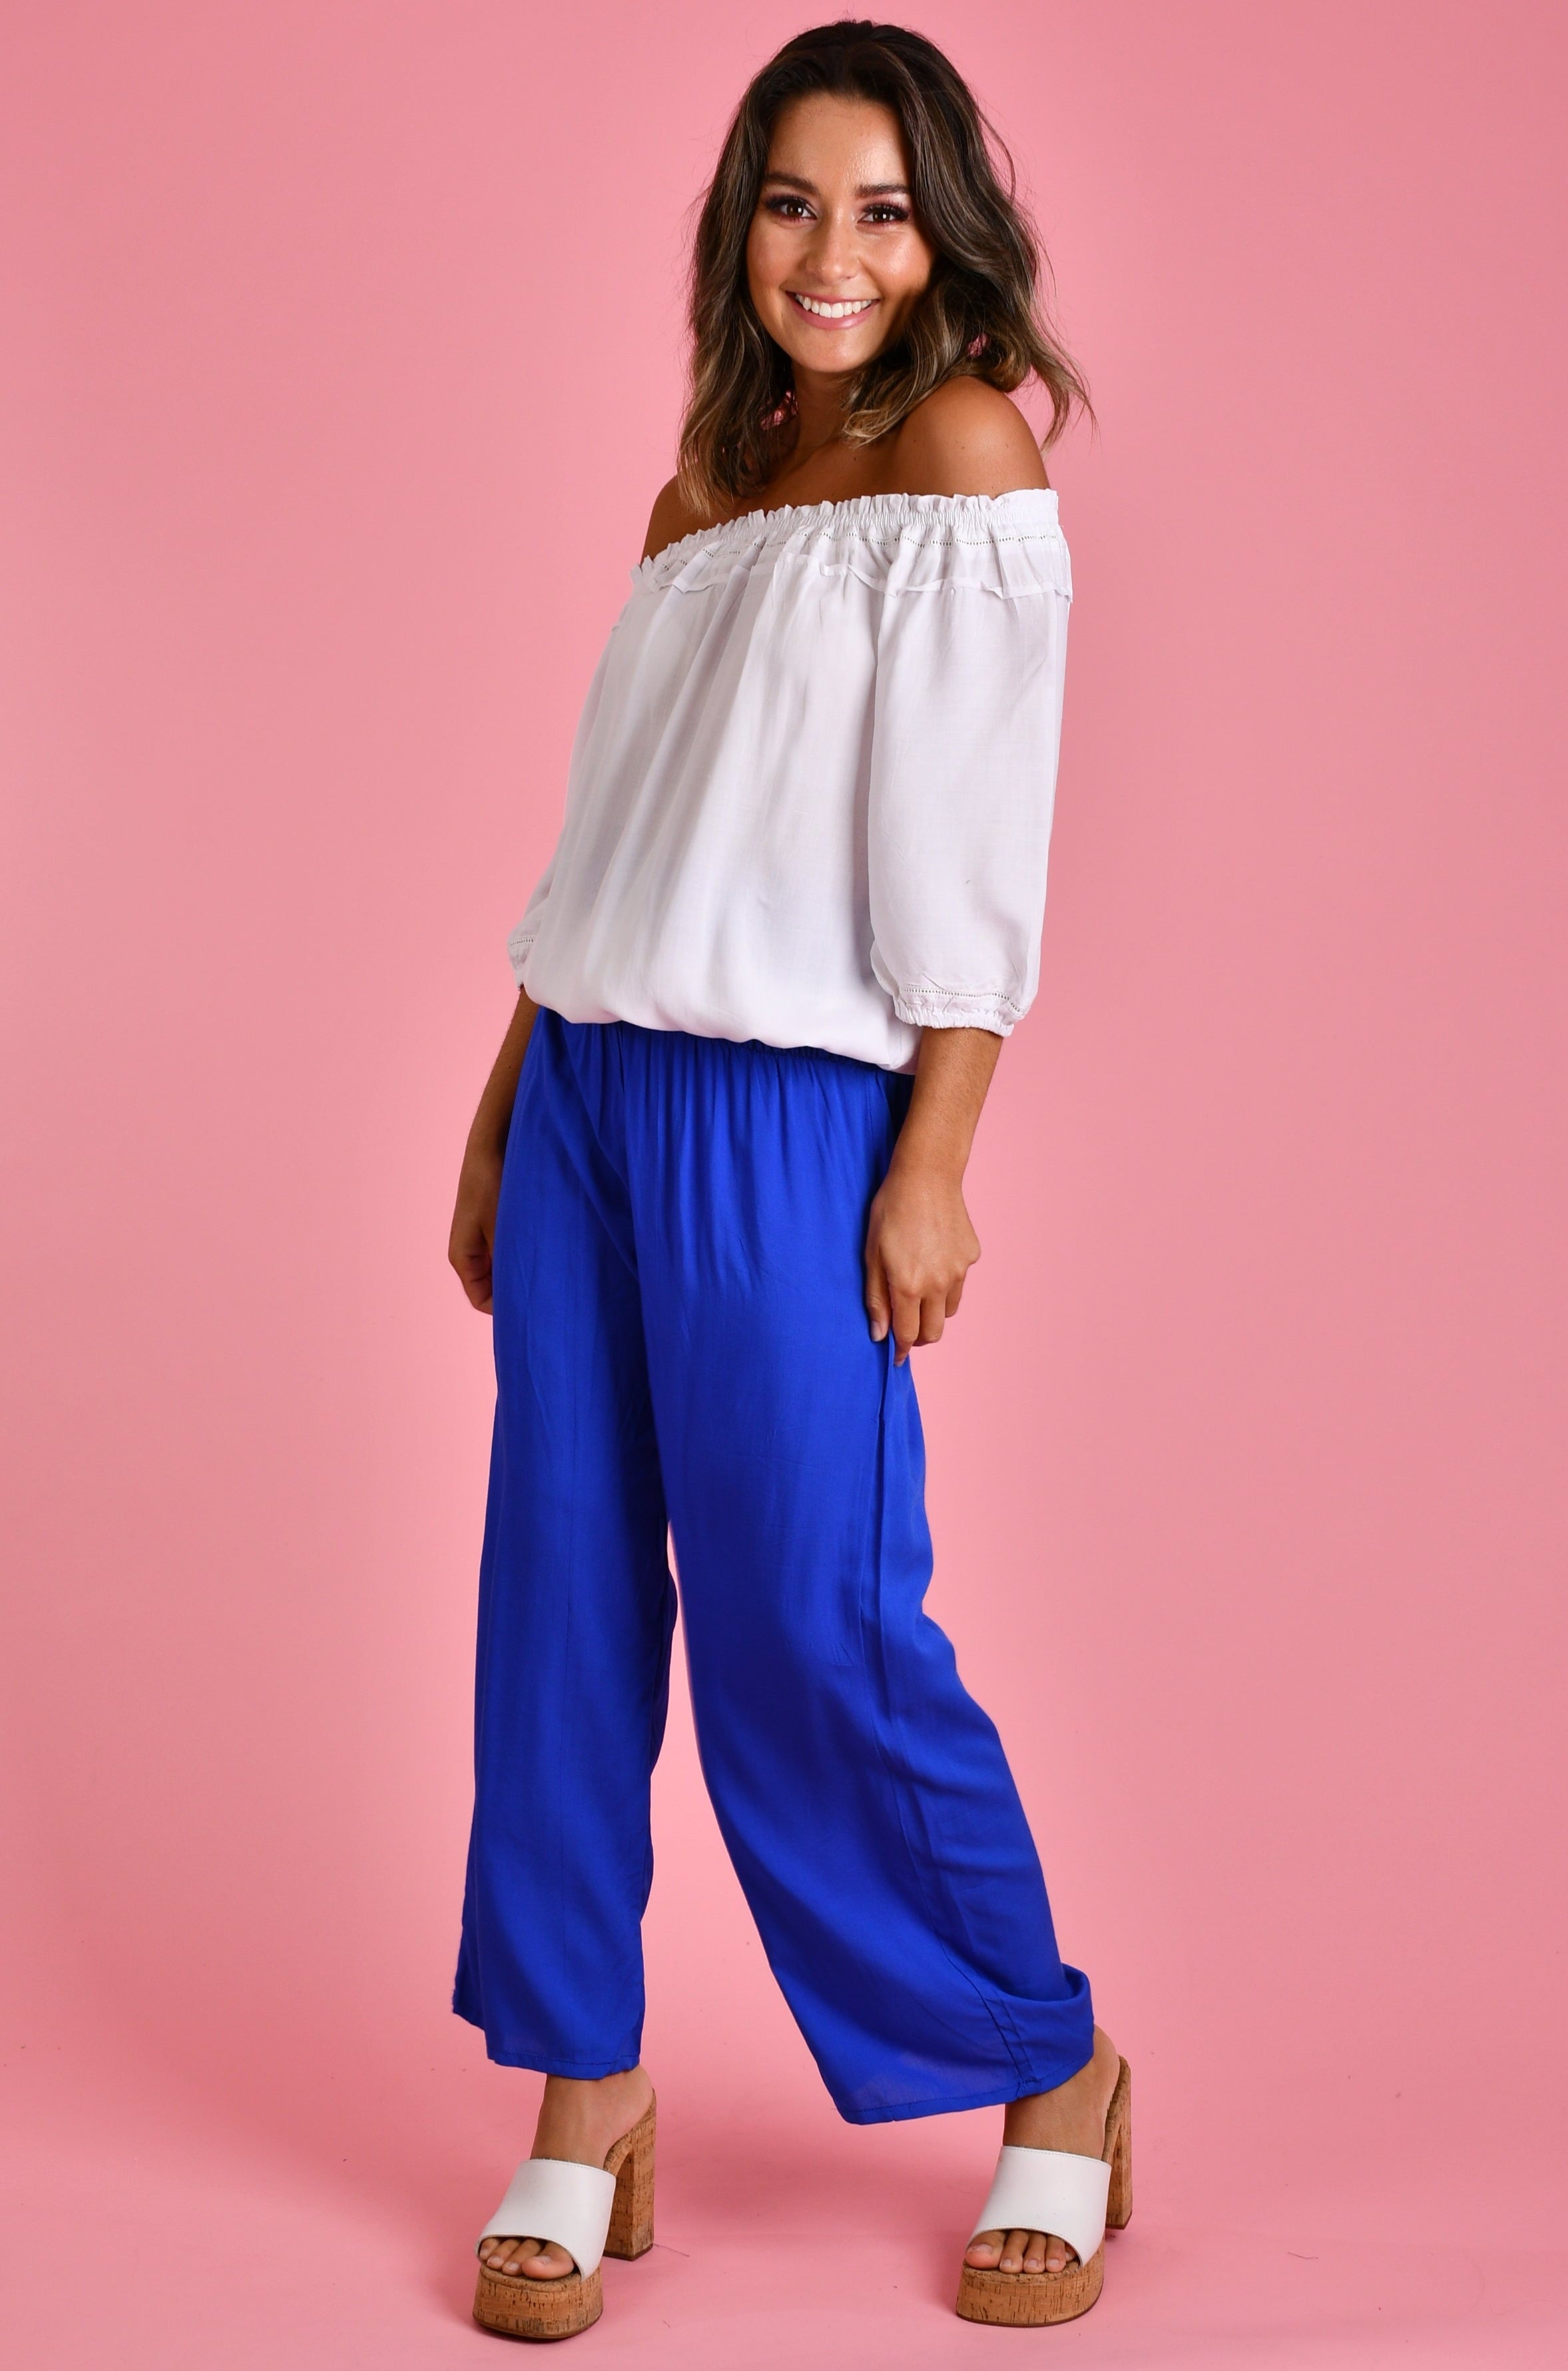 VGLP067 - LONG ROUCHED PANTS - COBALT